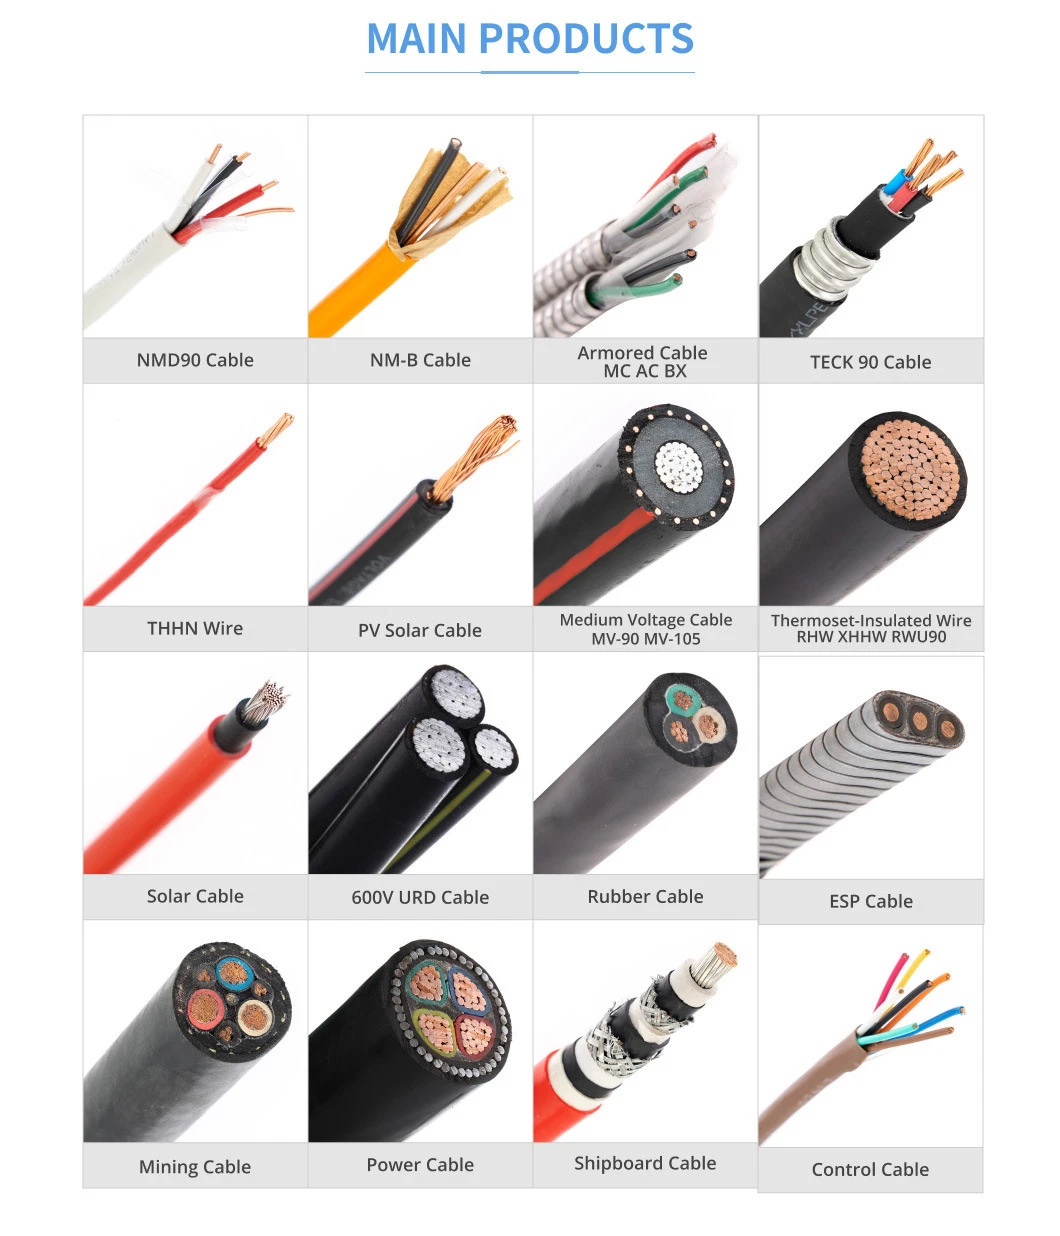 10 mm 35 mm 50mm 95mm ABC Aluminium Conductor Aerial Bundled Electrical Wires Cables 3 Phase Overhead Power Cable